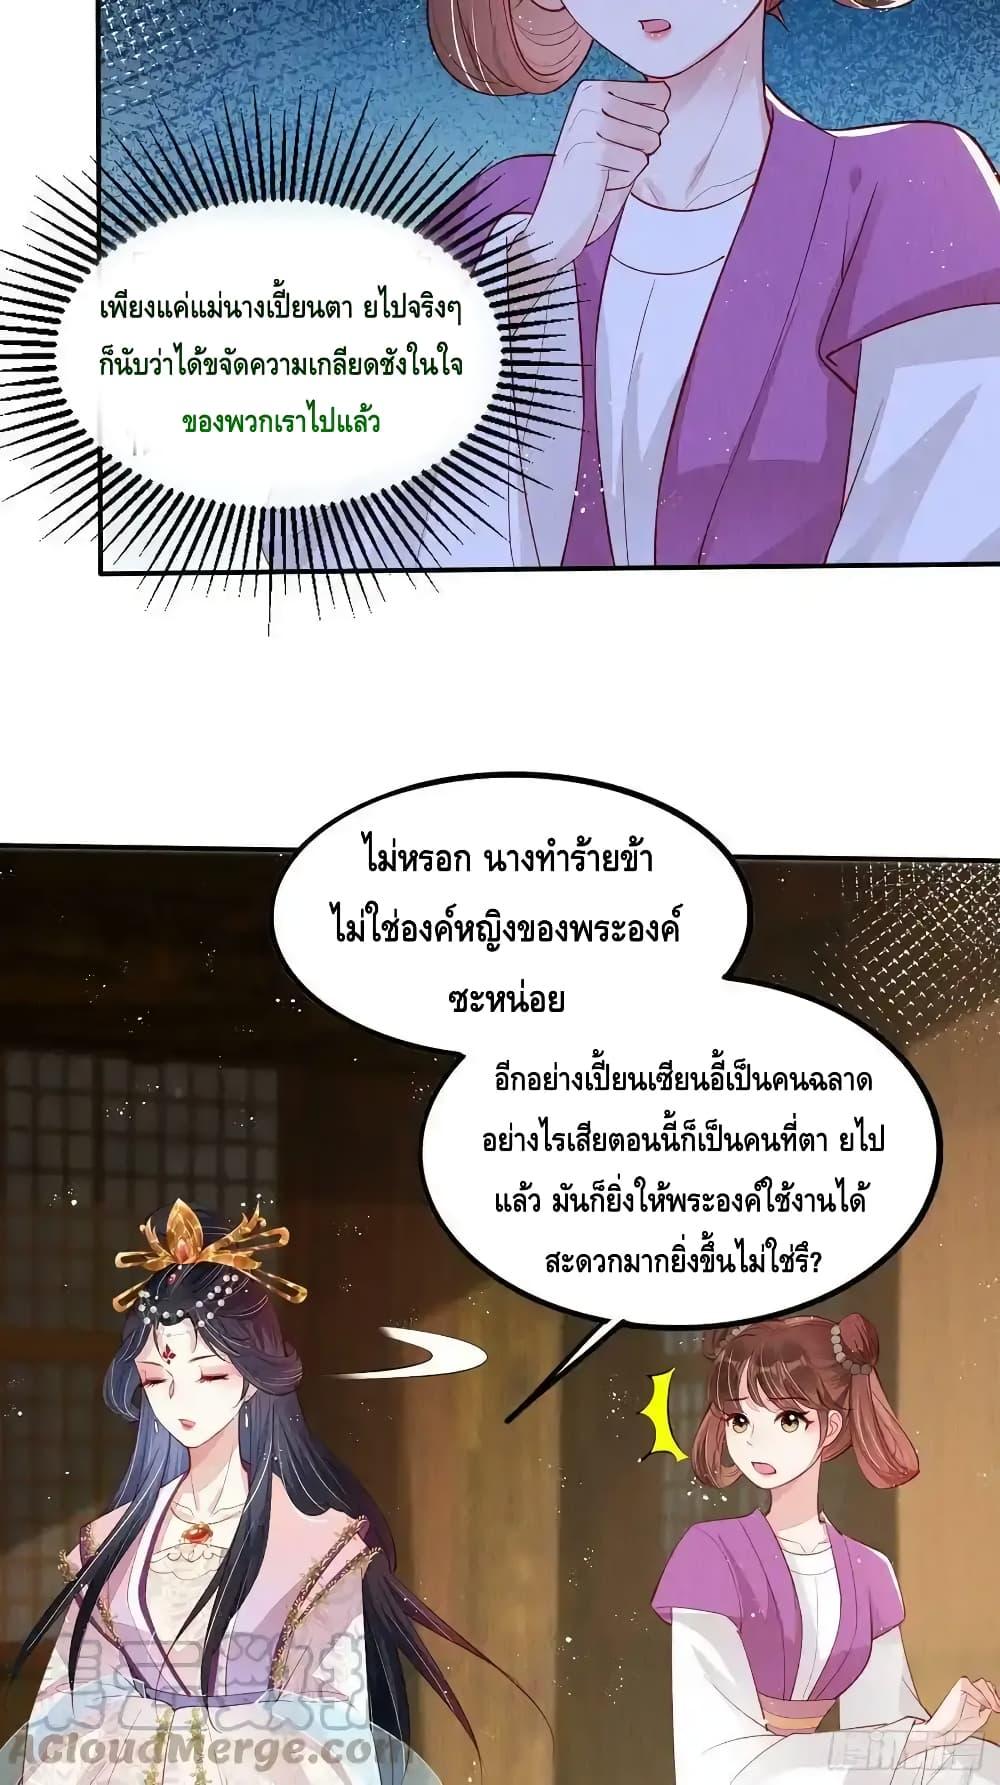 After I Bloom, a Hundred Flowers Will ill – ดอกไม้นับ ตอนที่ 70 (5)